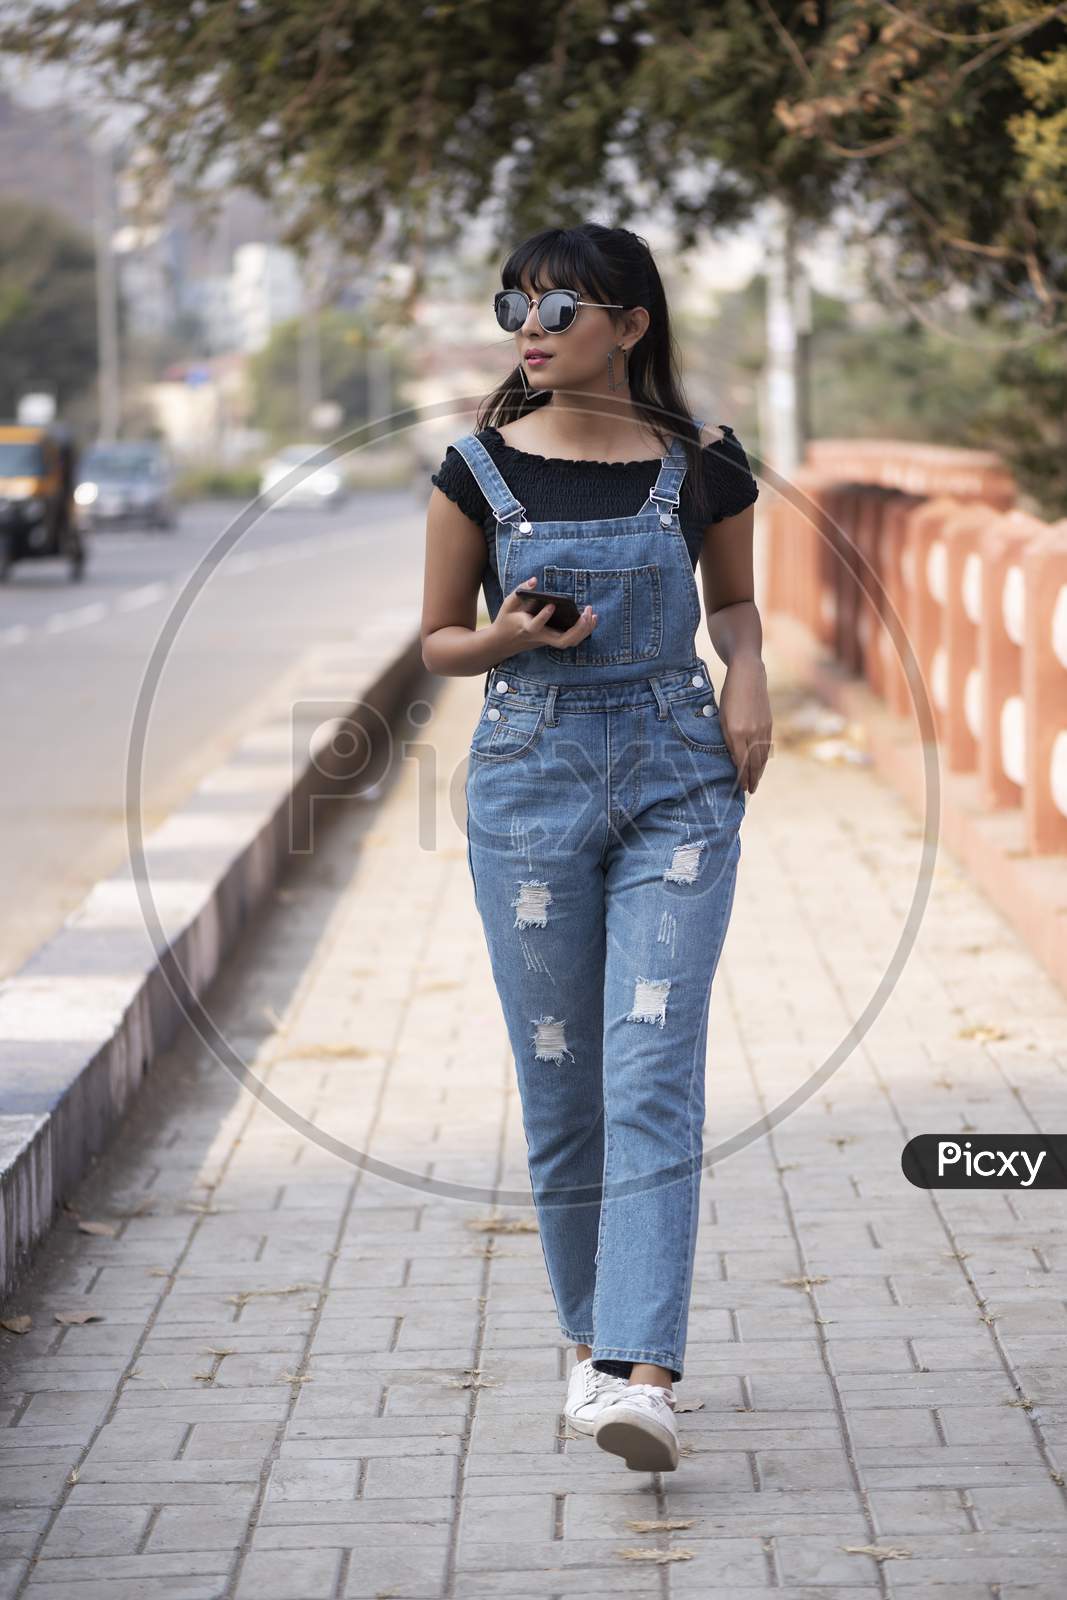 Lifestyle of young Indian model wearing denim jump suit and walking on streets